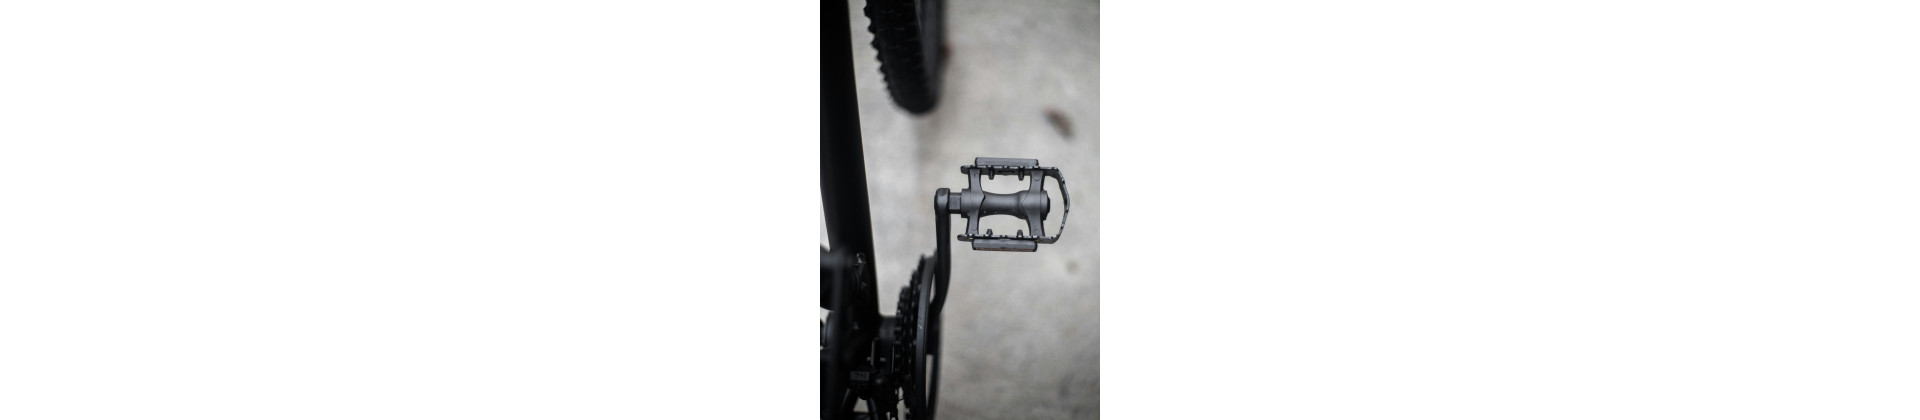 MTB parts and accessories available in stock until -70%